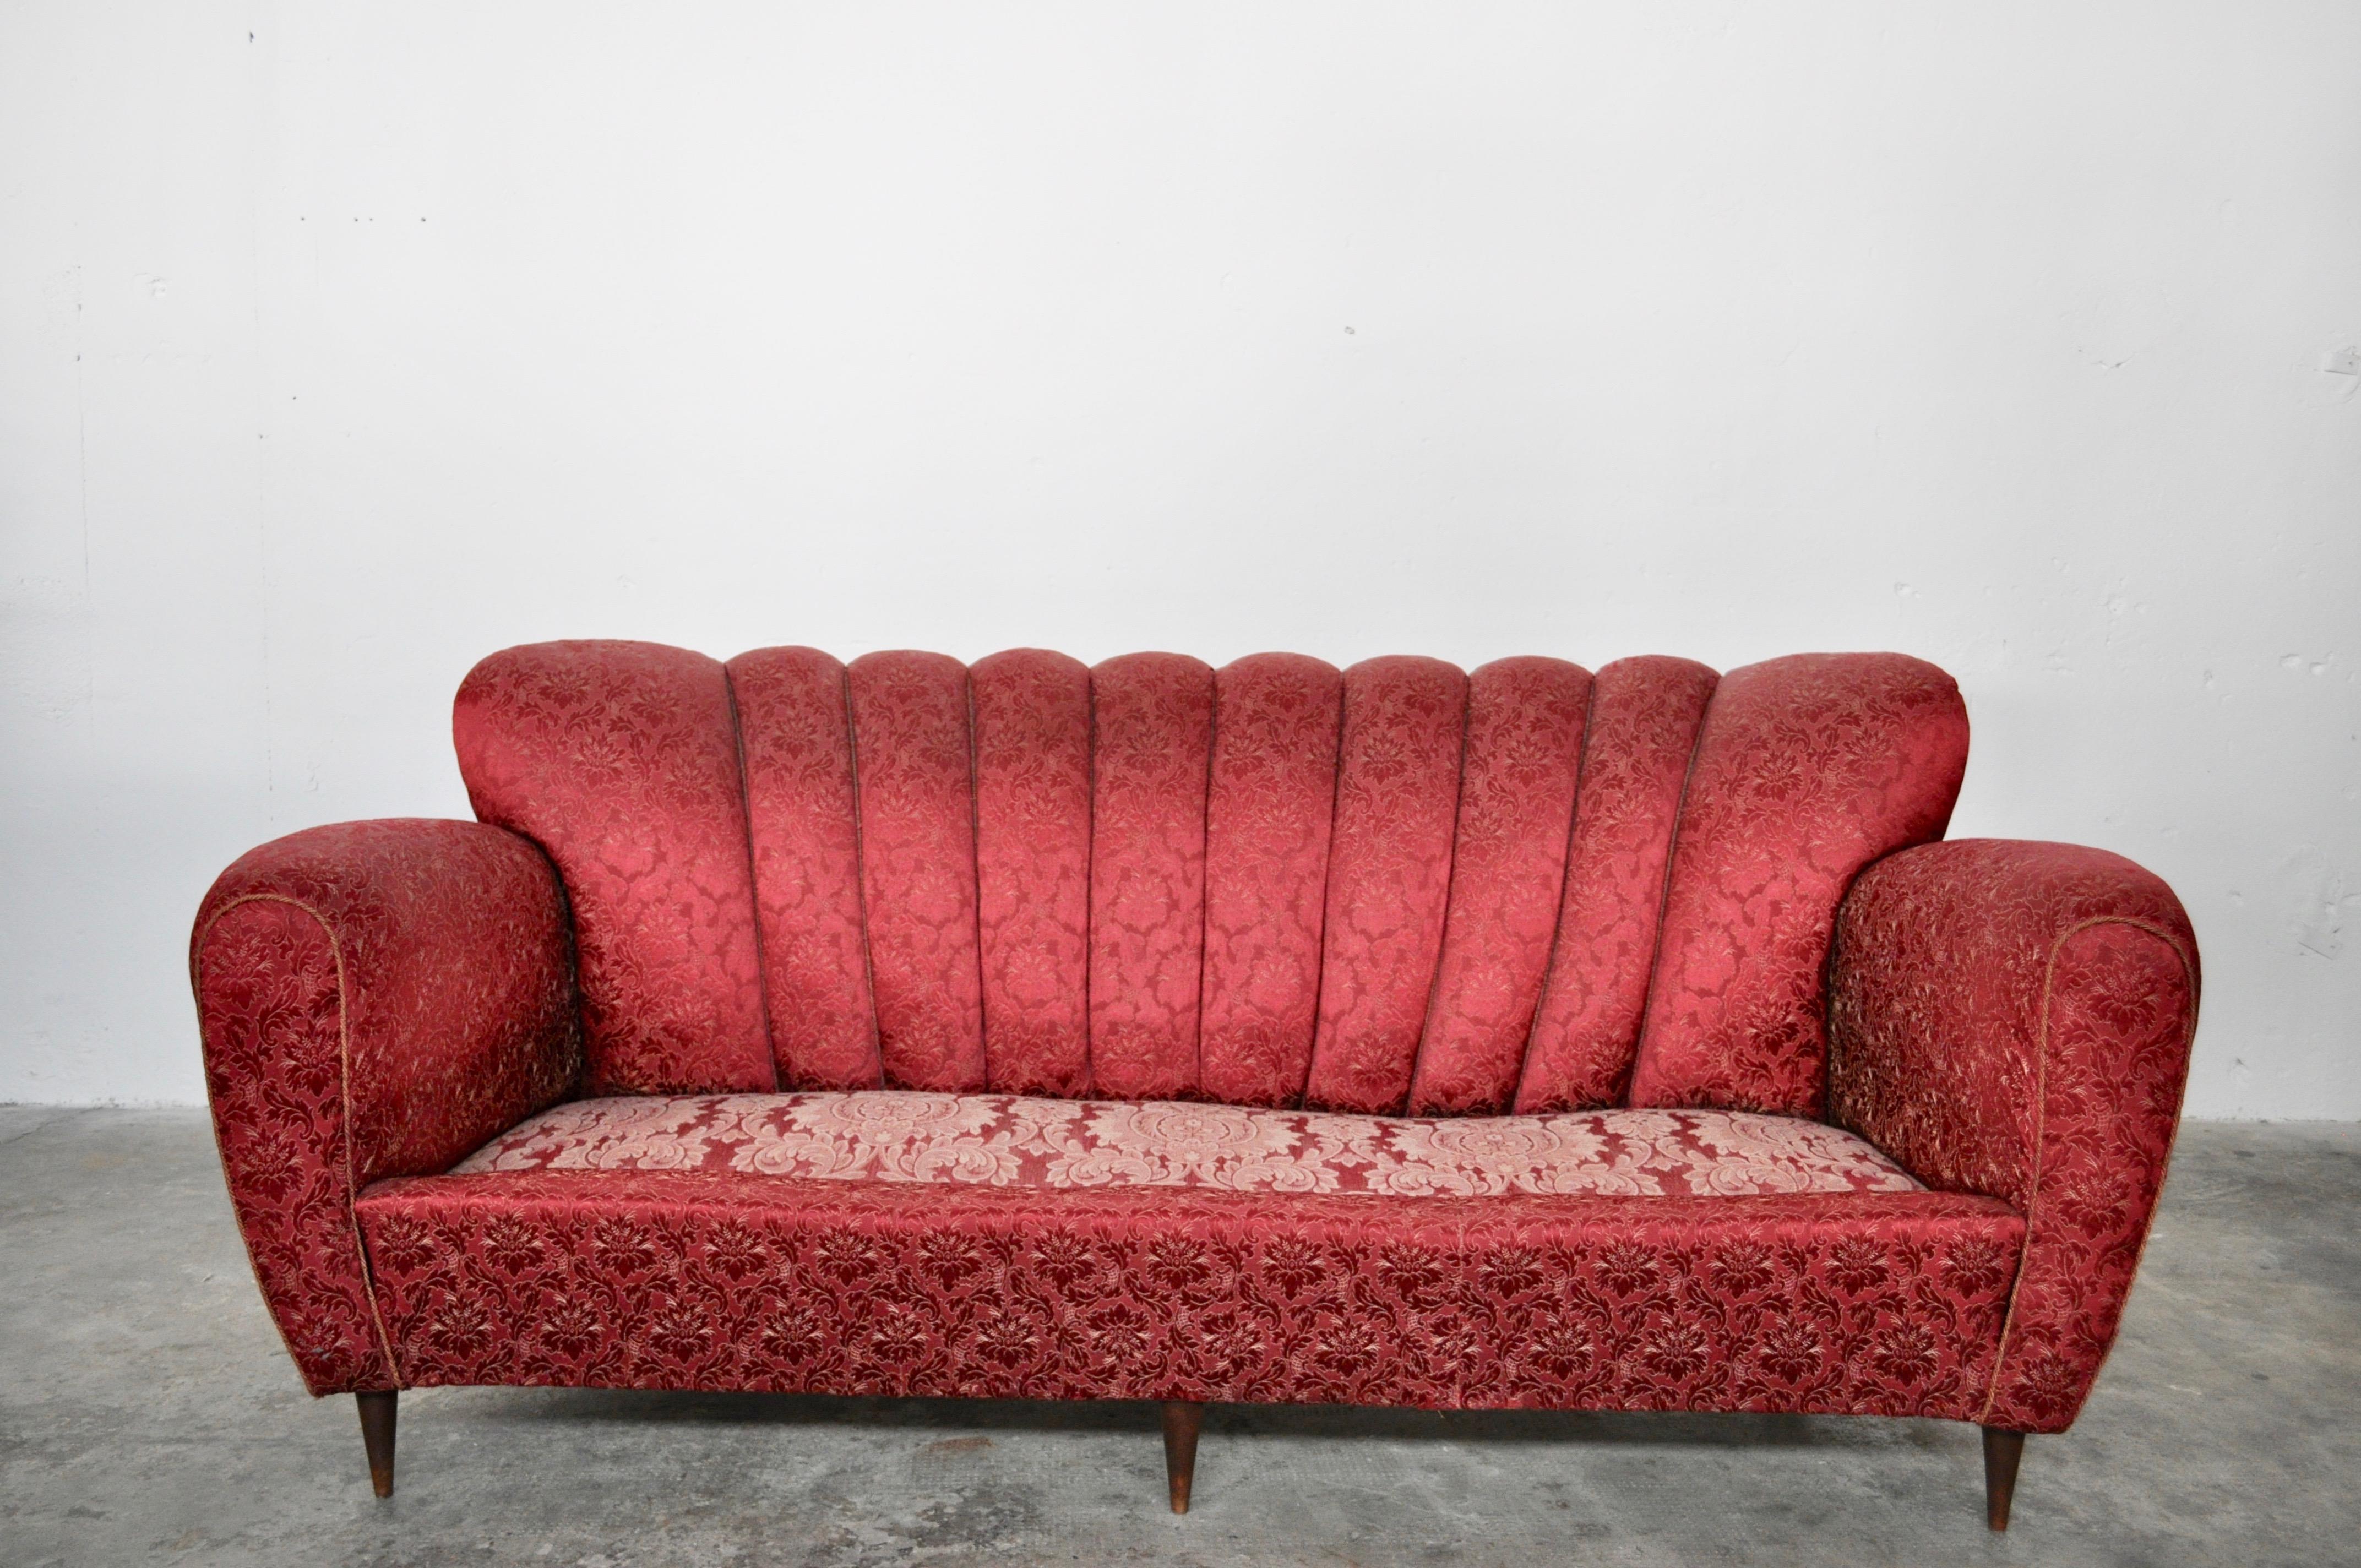 Three-Seat Sofa in Red Fabric, Gold Cord Details, by Paolo Buffa, Italy, 1950 For Sale 1